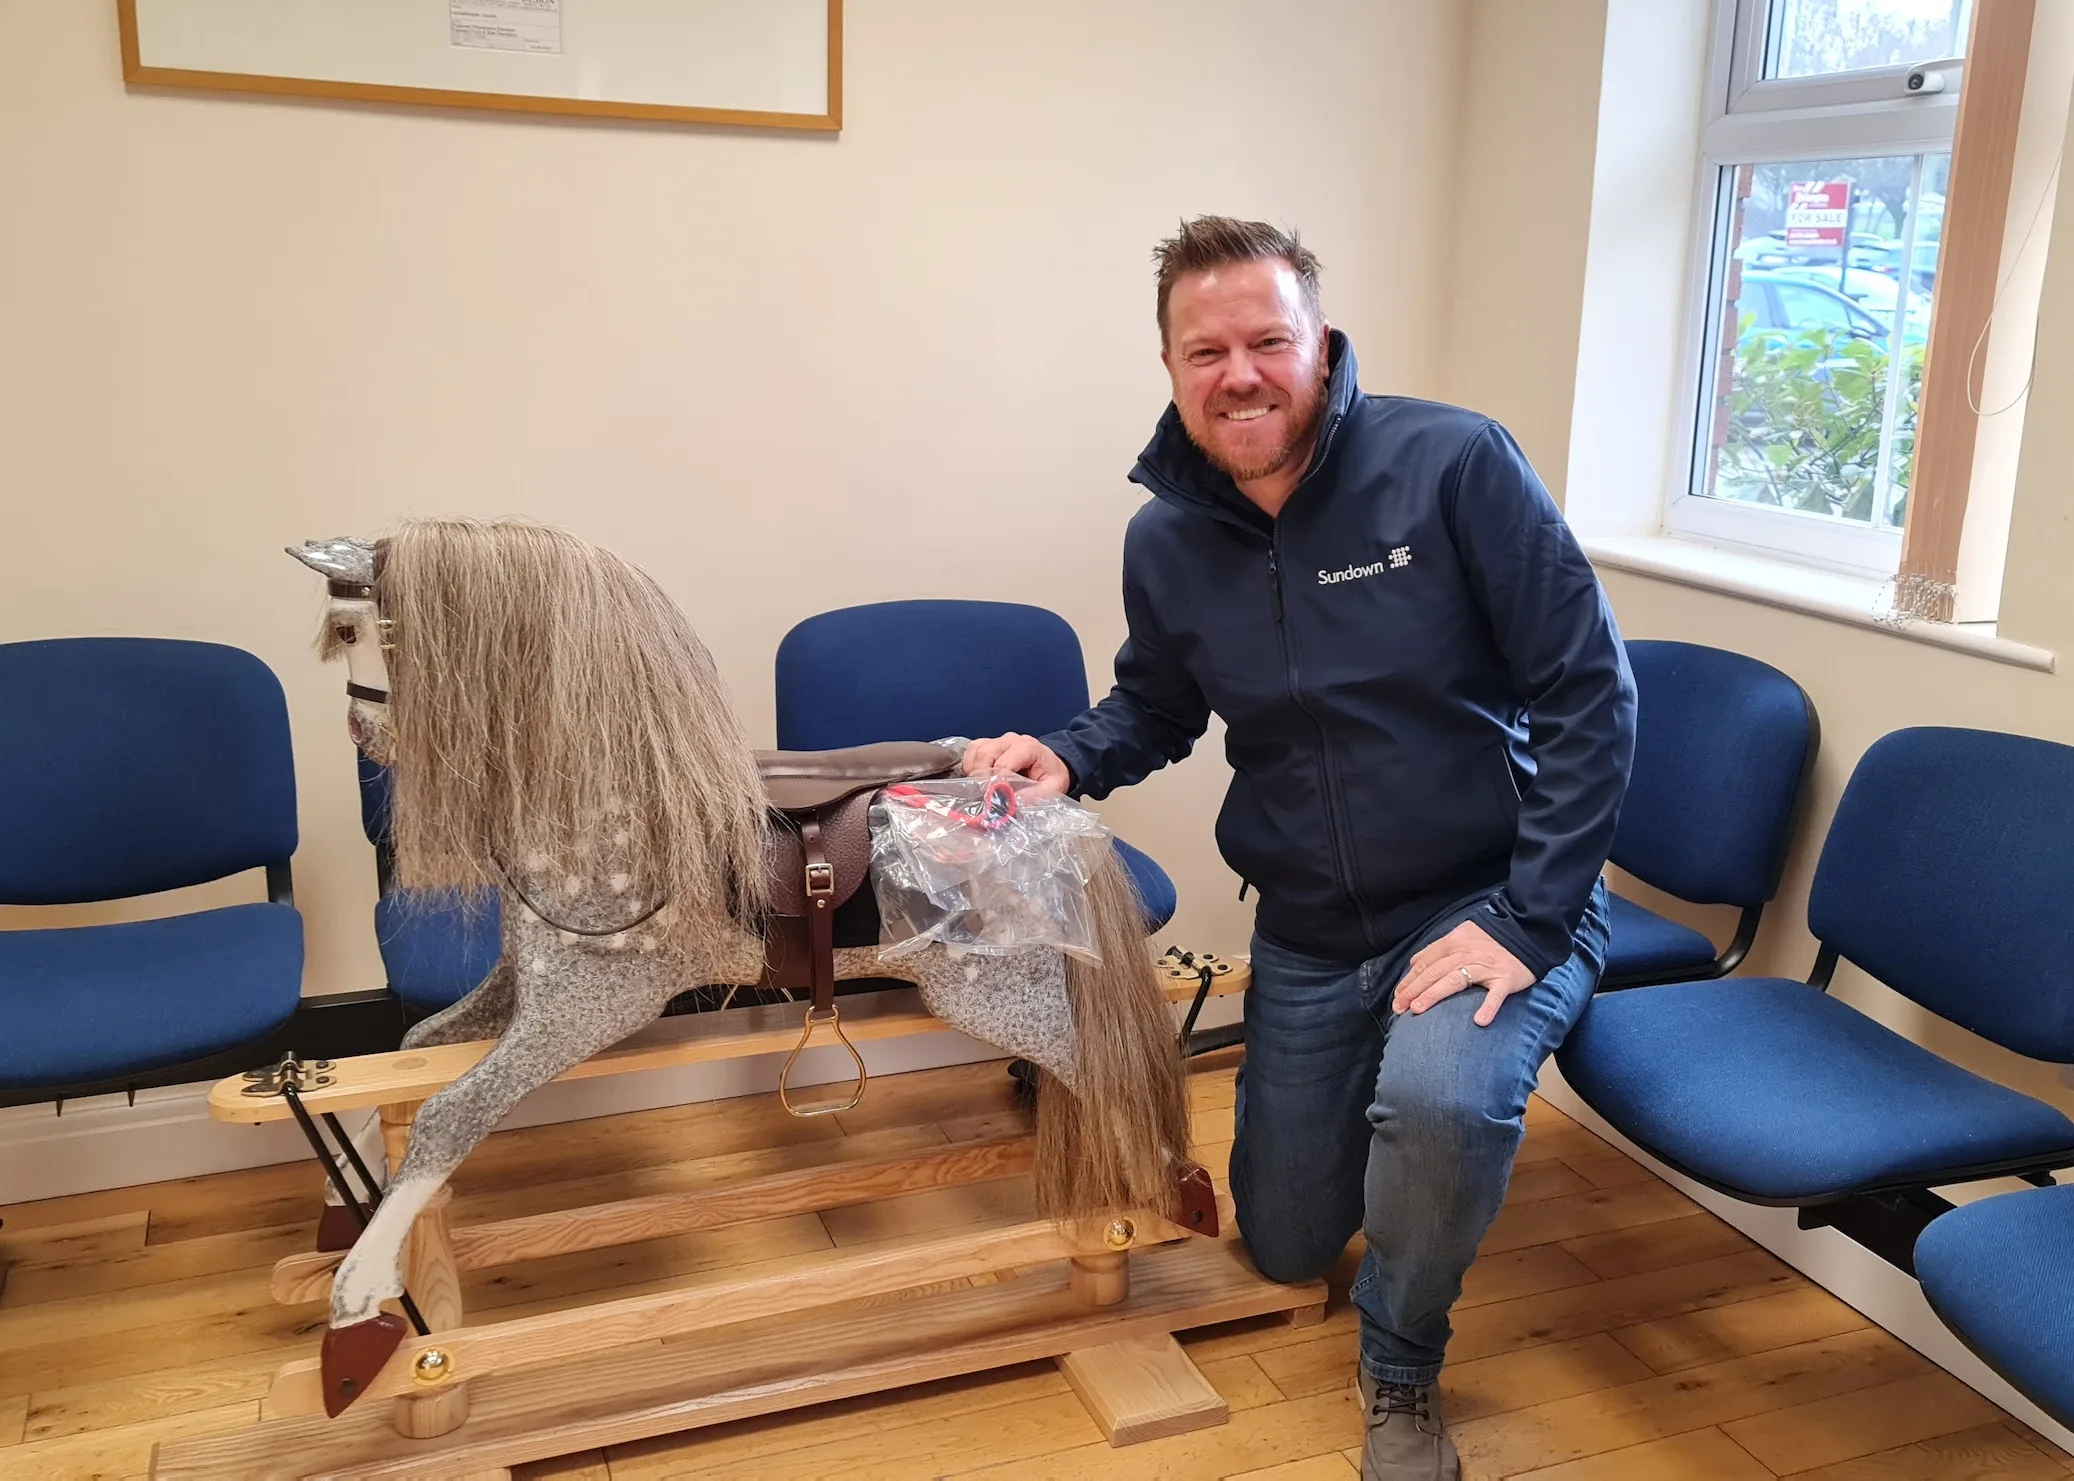 Sundown Solutions support Age Concern Lancashire and win a rocking horse